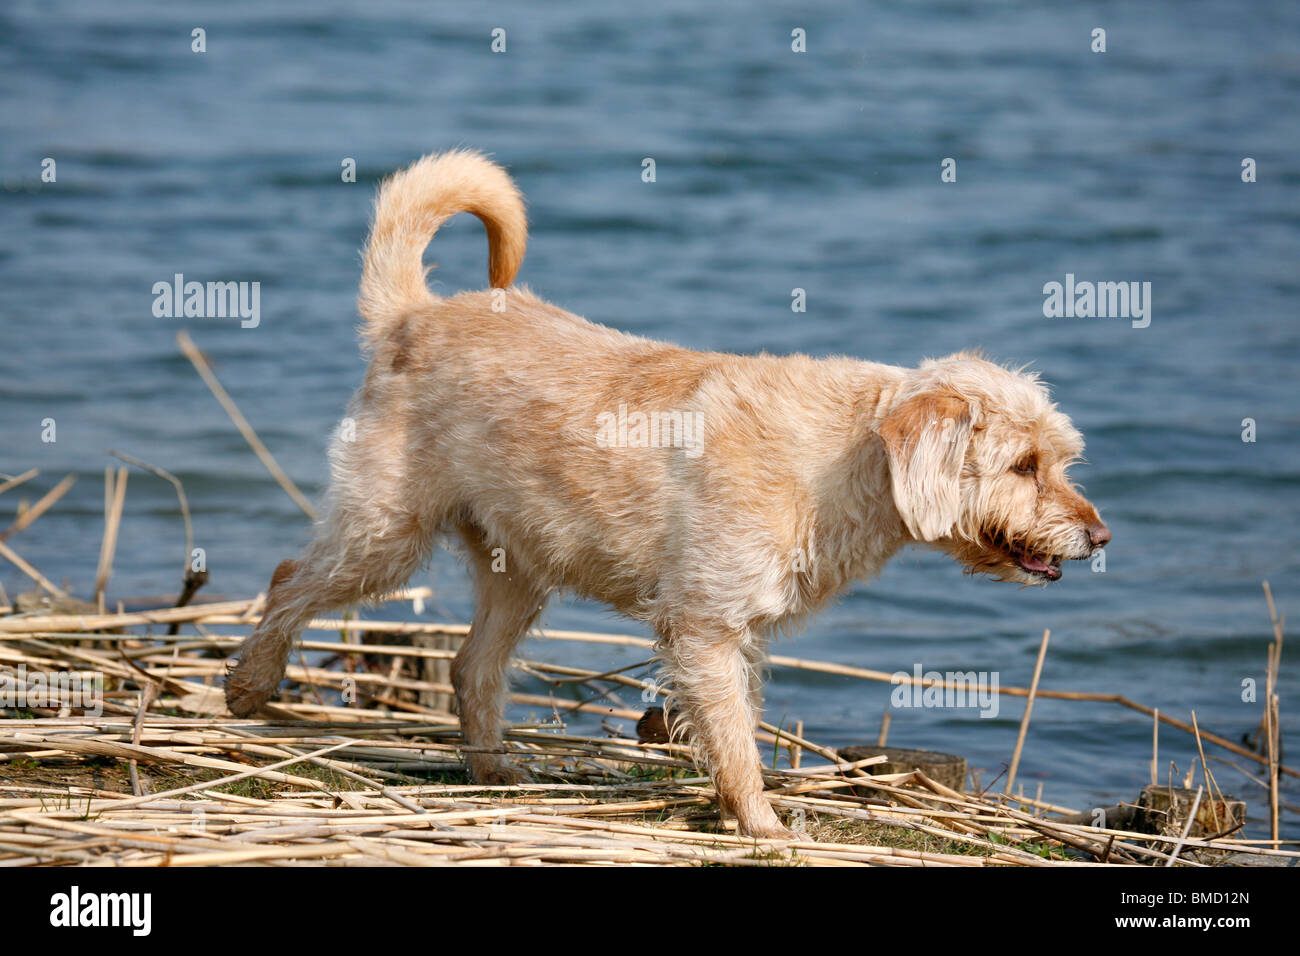 Mischling / cane ccrossbreed Foto Stock